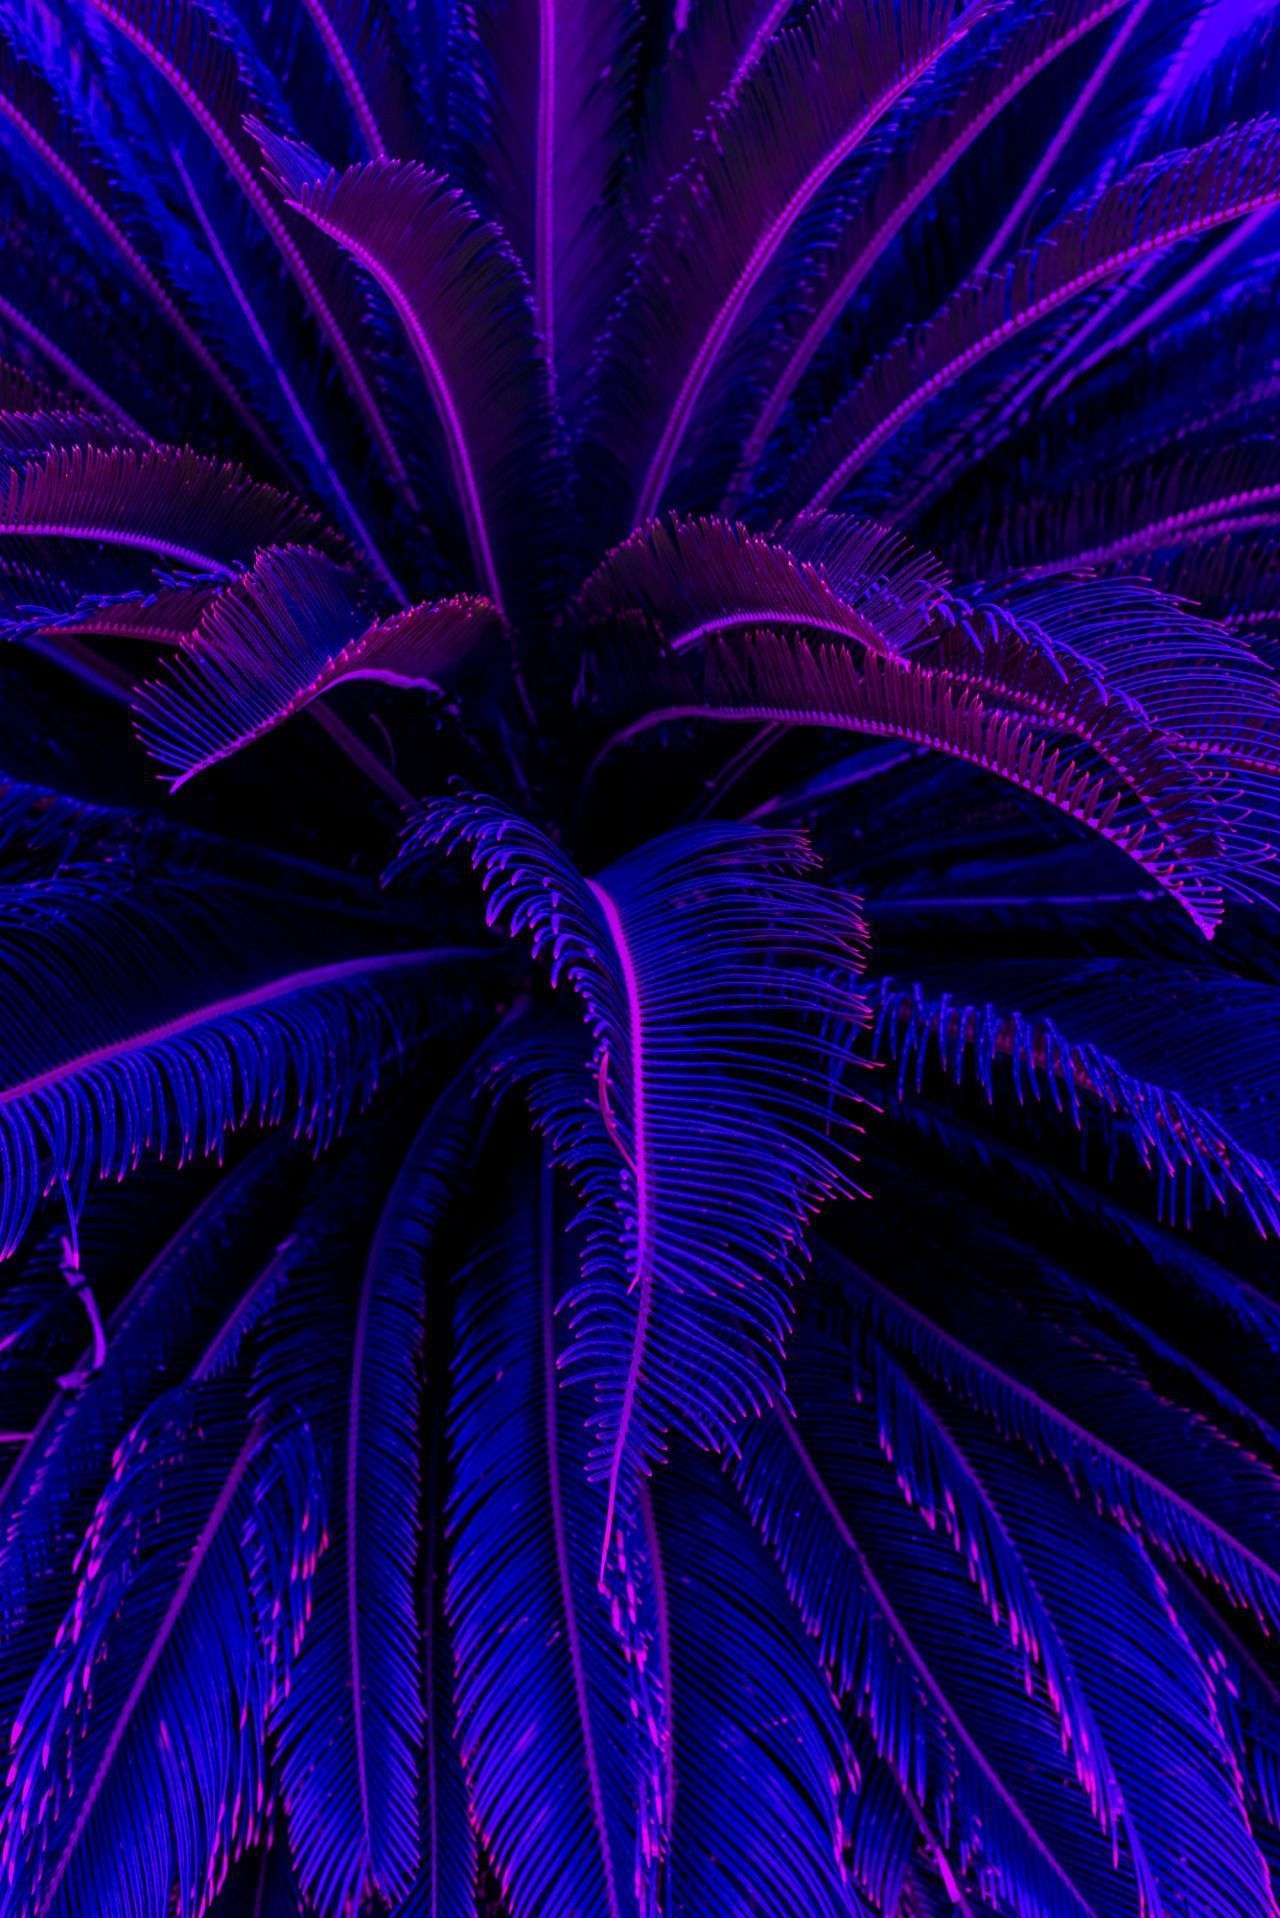 A close up of a plant with purple and blue lighting. - Dark purple